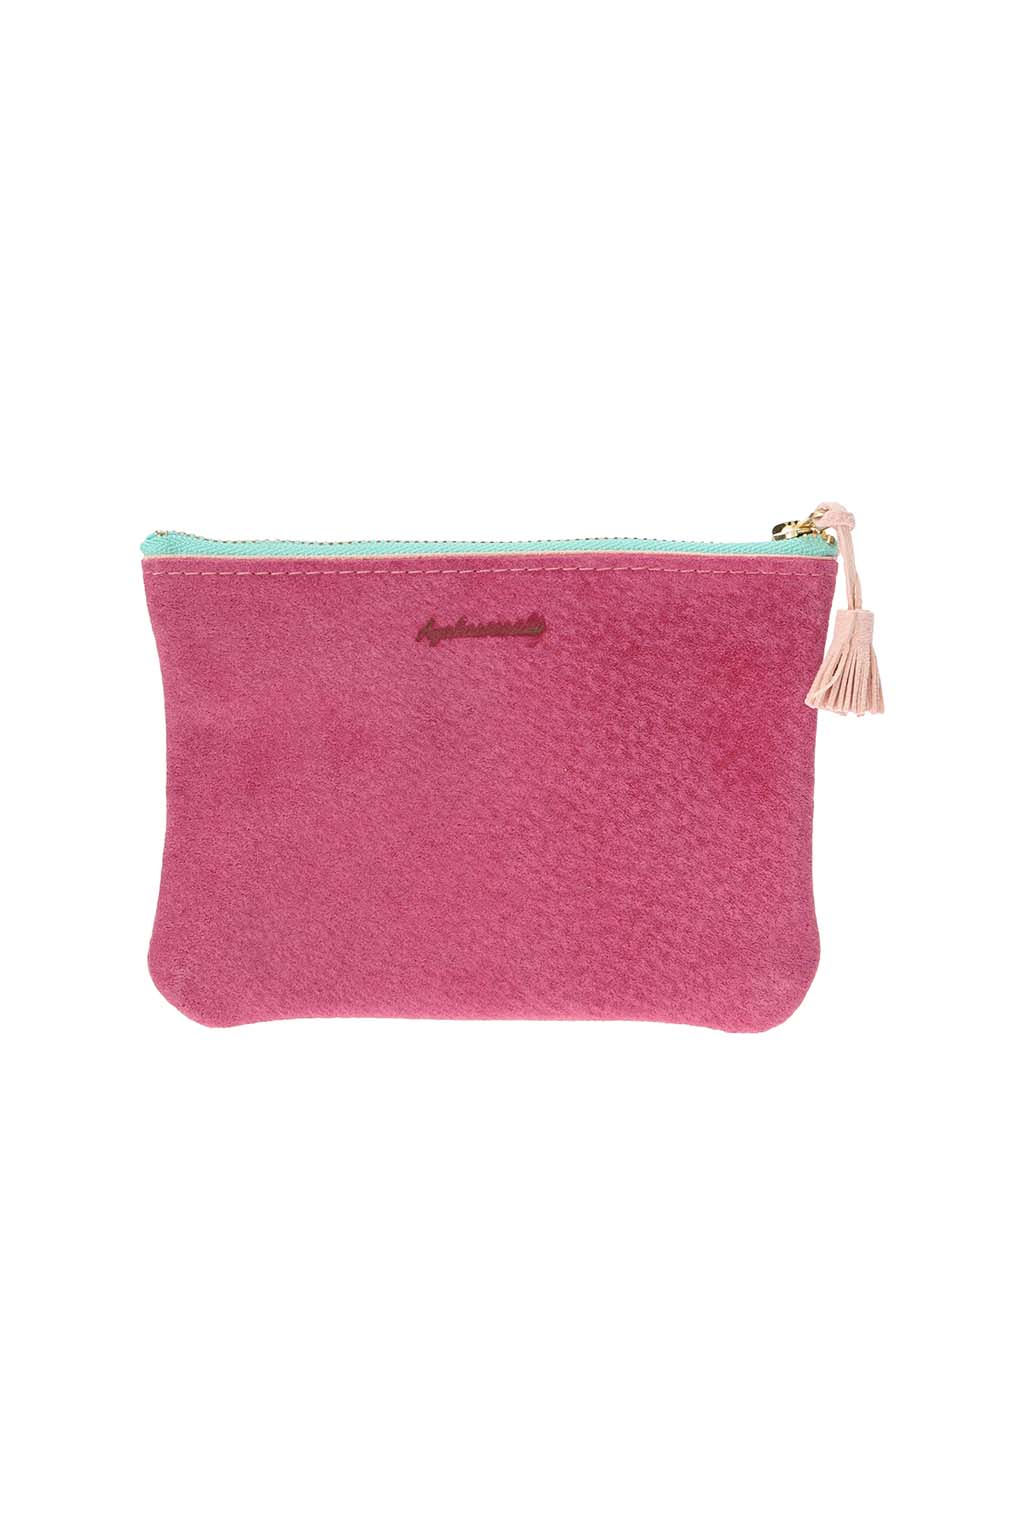 pig-pouch-2022-pink-02